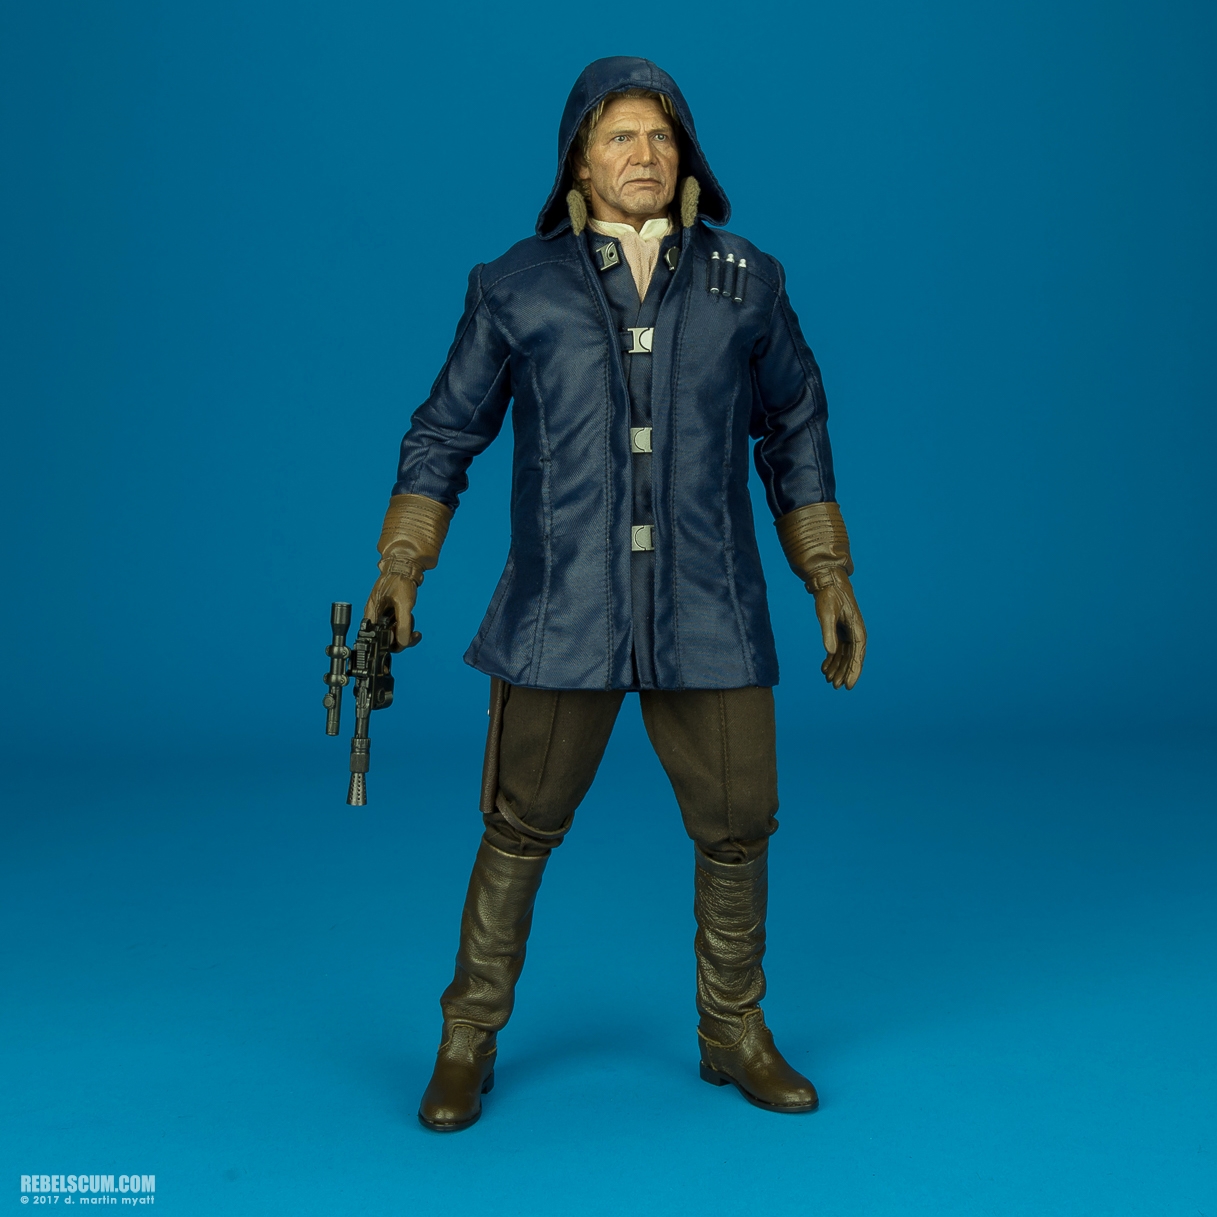 MMS376-Han-Solo-Chewbacca-The-Force-Awakens-Hot-Toys-035.jpg